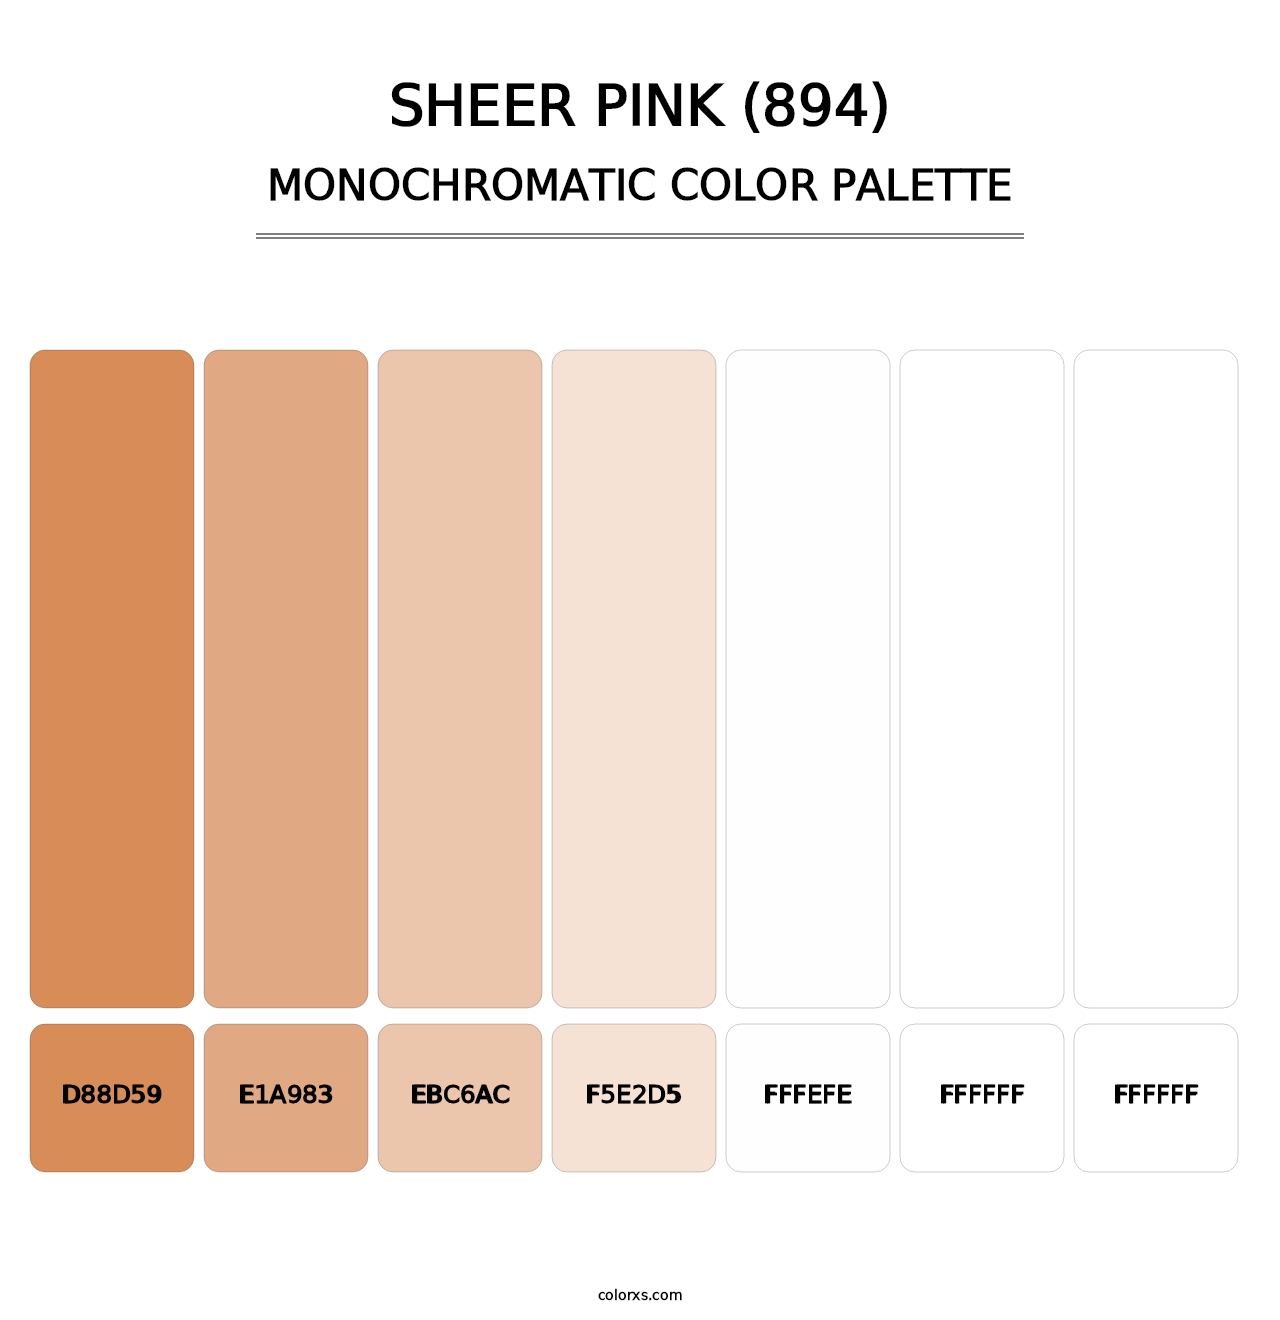 Sheer Pink (894) - Monochromatic Color Palette